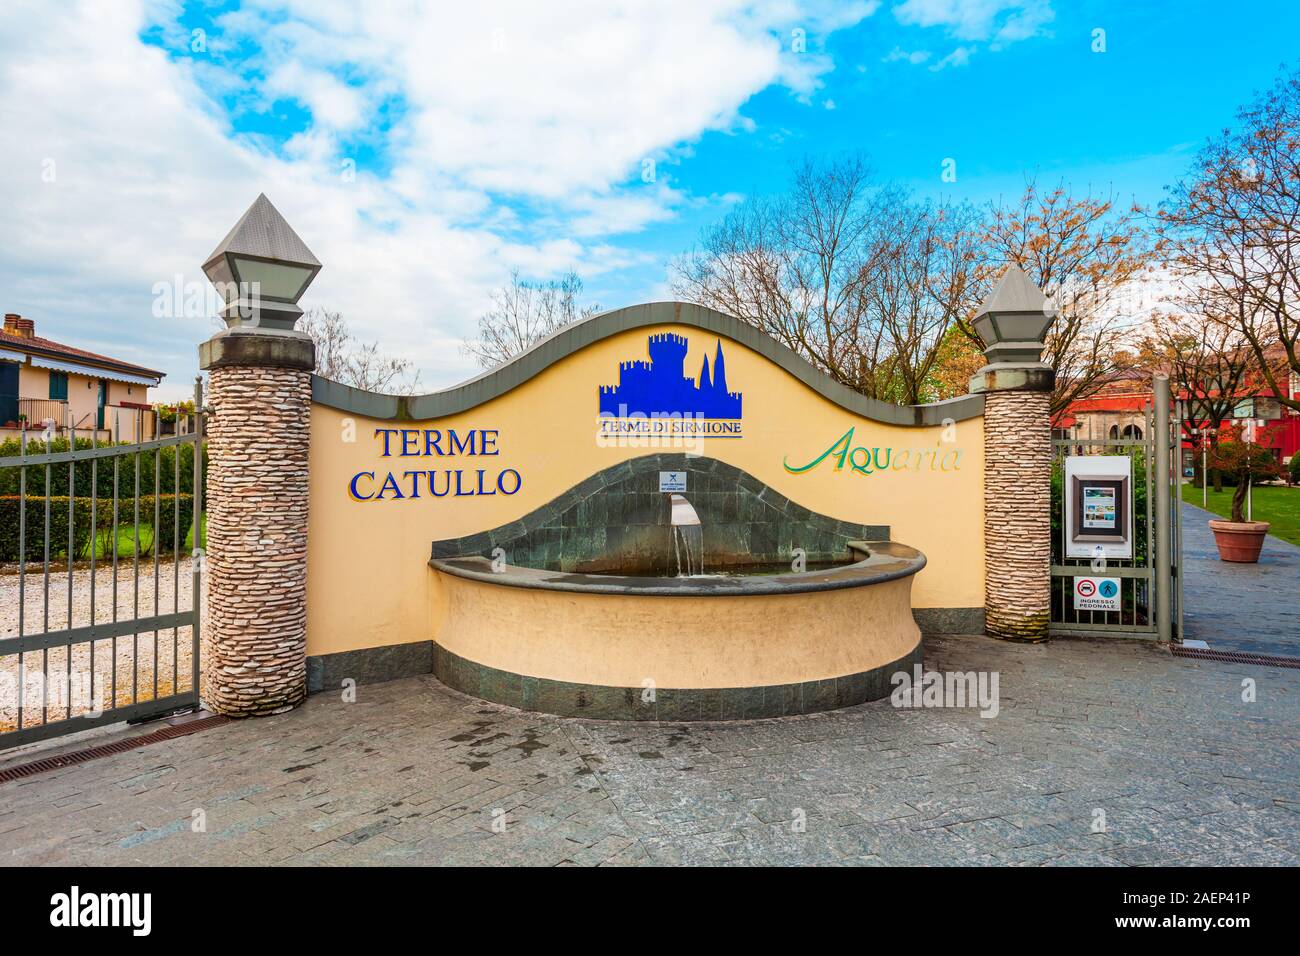 SIRMIONE, ITALY - APRIL 12, 2019: Terme Catullo or Aquaria Thermal SPA in the Sirmione town, located at the Garda lake in Italy Stock Photo